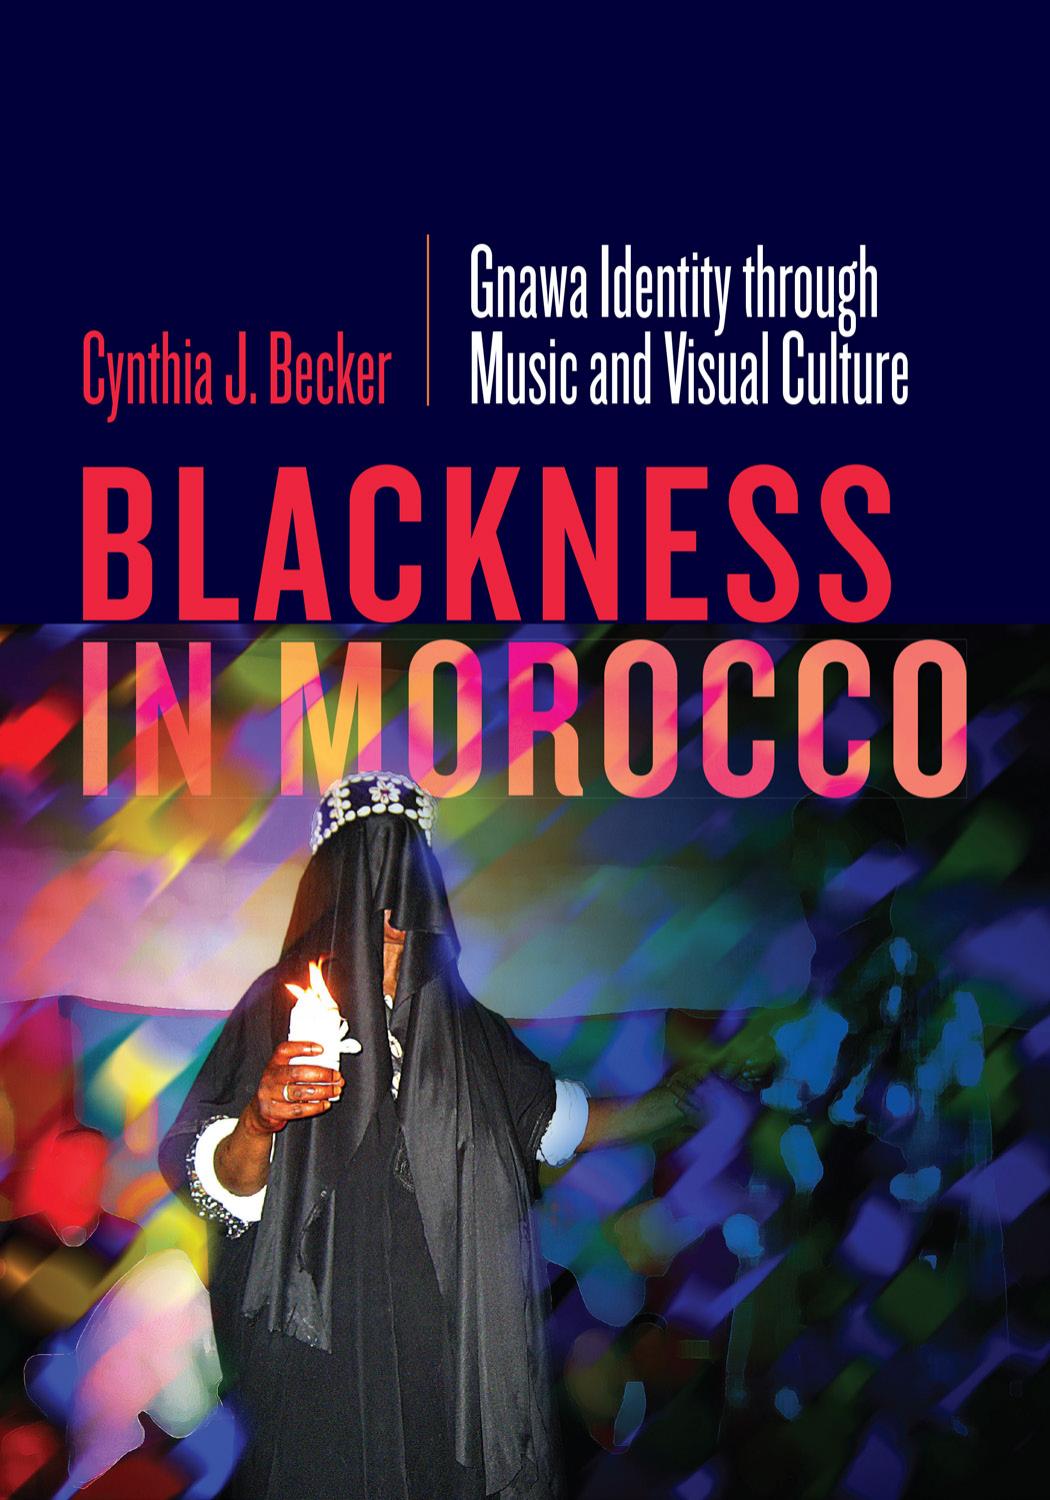 Blackness in Morocco: Gnawa Identity through Music and Visual Culture by Cynthia J. Becker